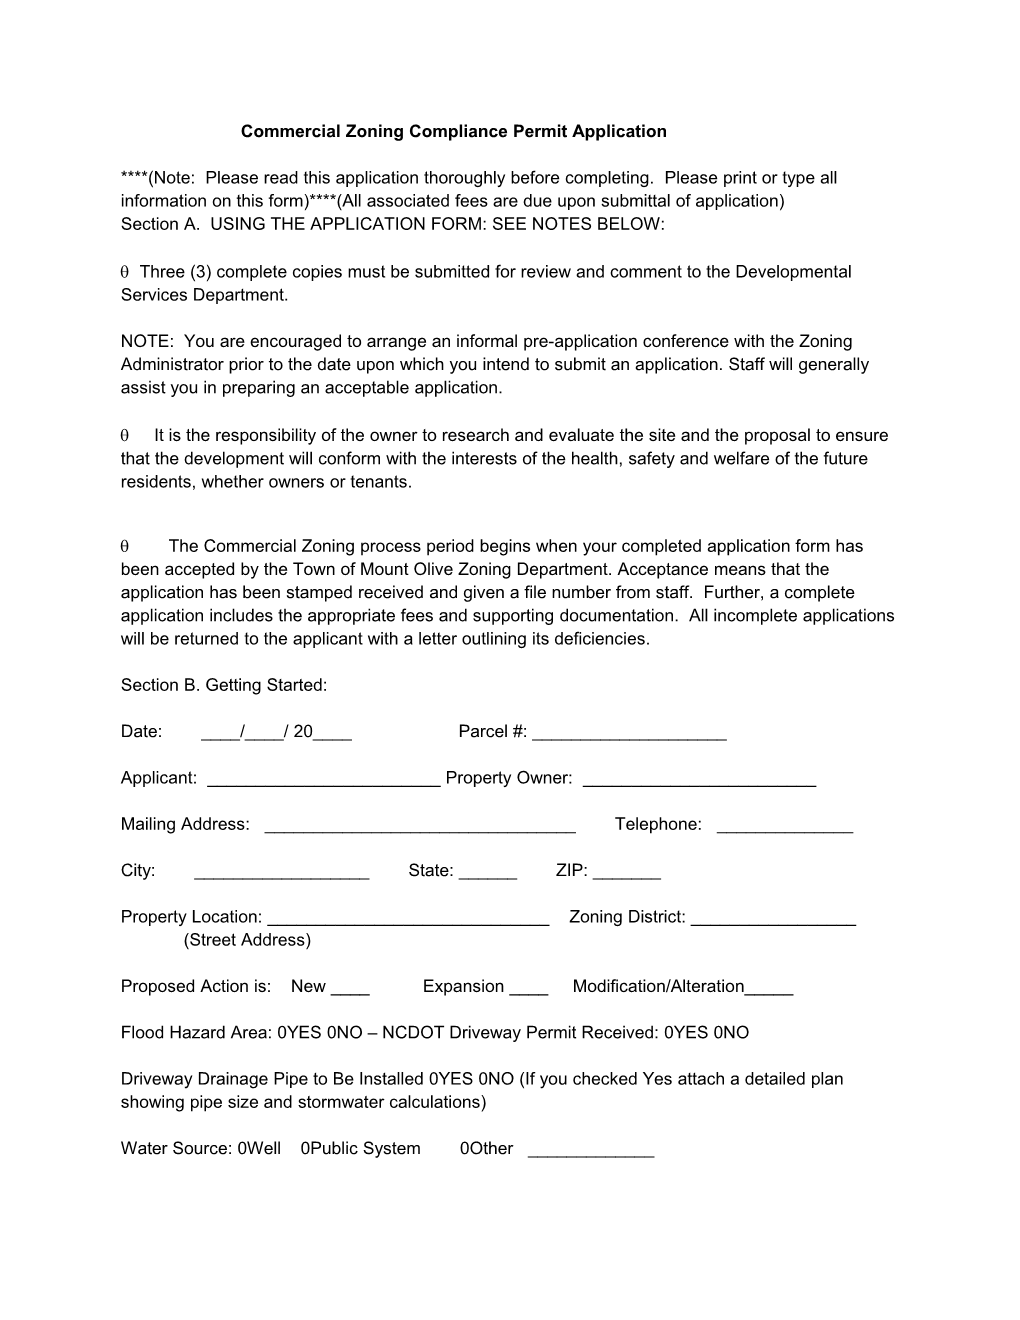 Commercial Zoning Compliance Permit Application (Note: Please Read This Application Thoroughly